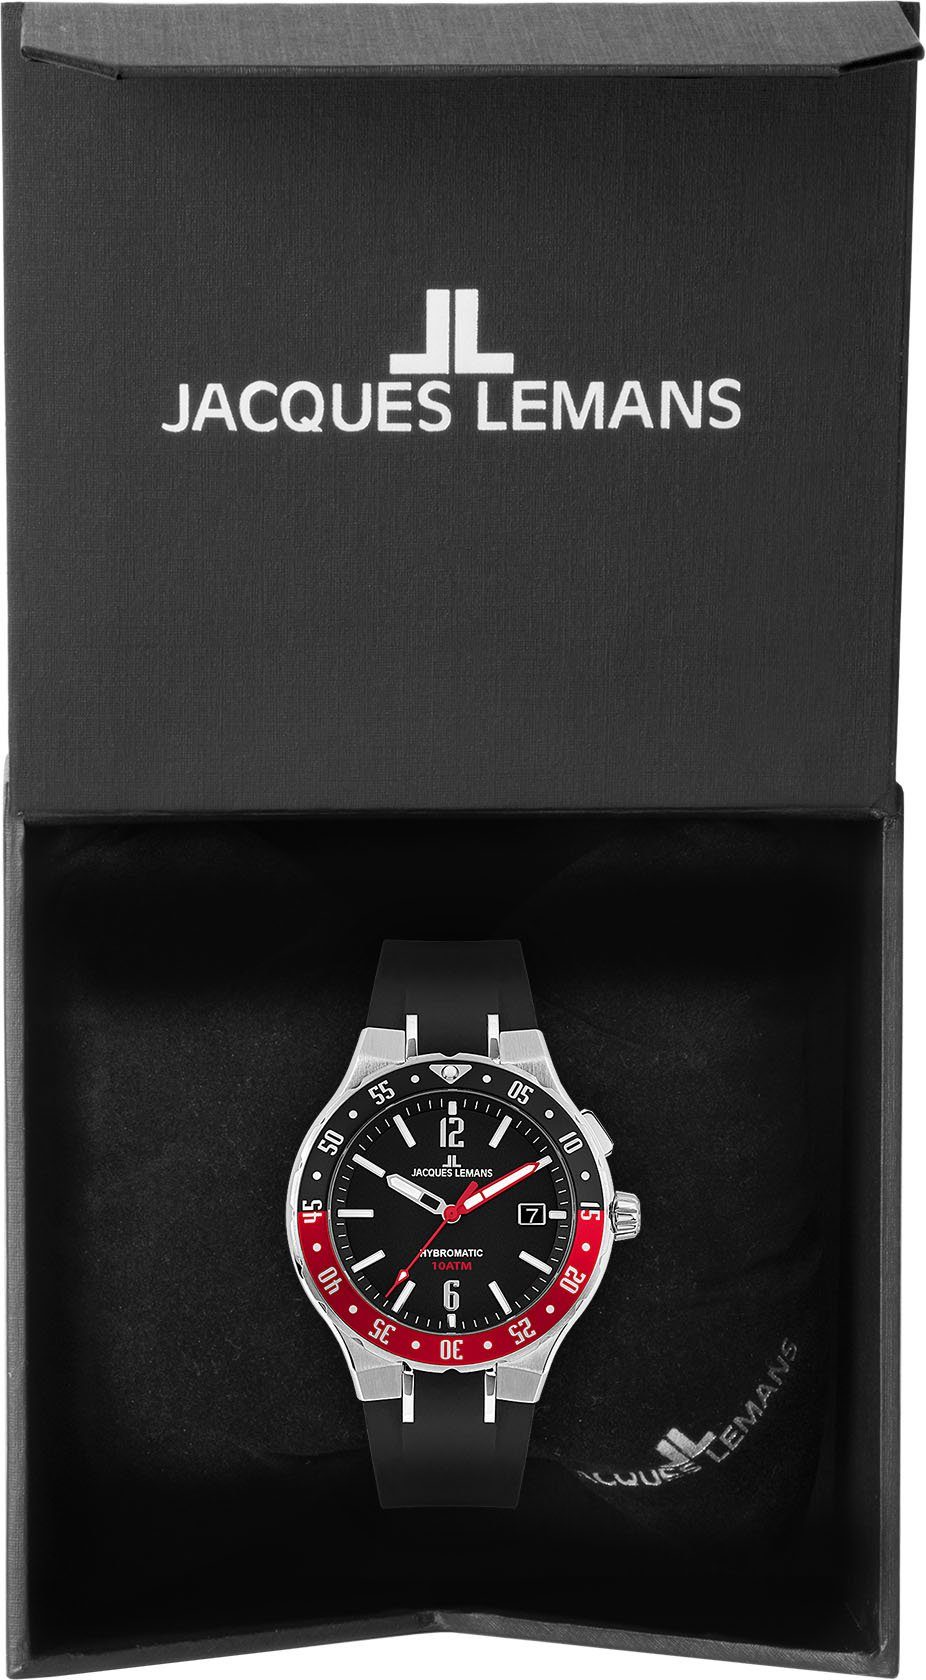 Jacques Lemans Kineticuhr Hybromatic, 1-2109A schwarz rot